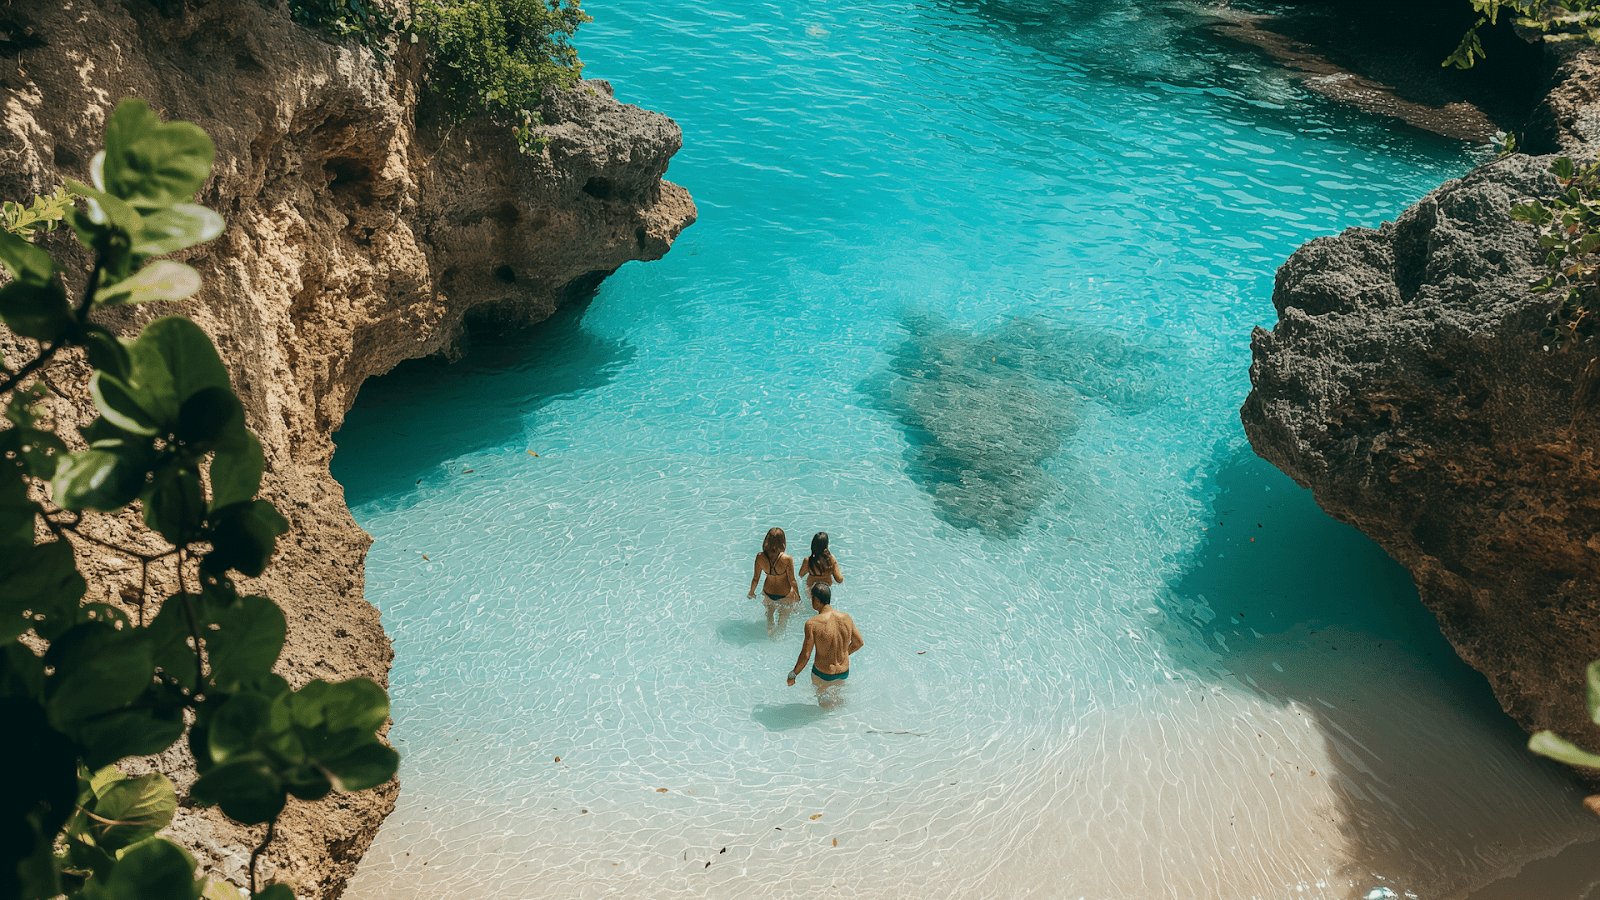 A family swimming at a secluded beach cove